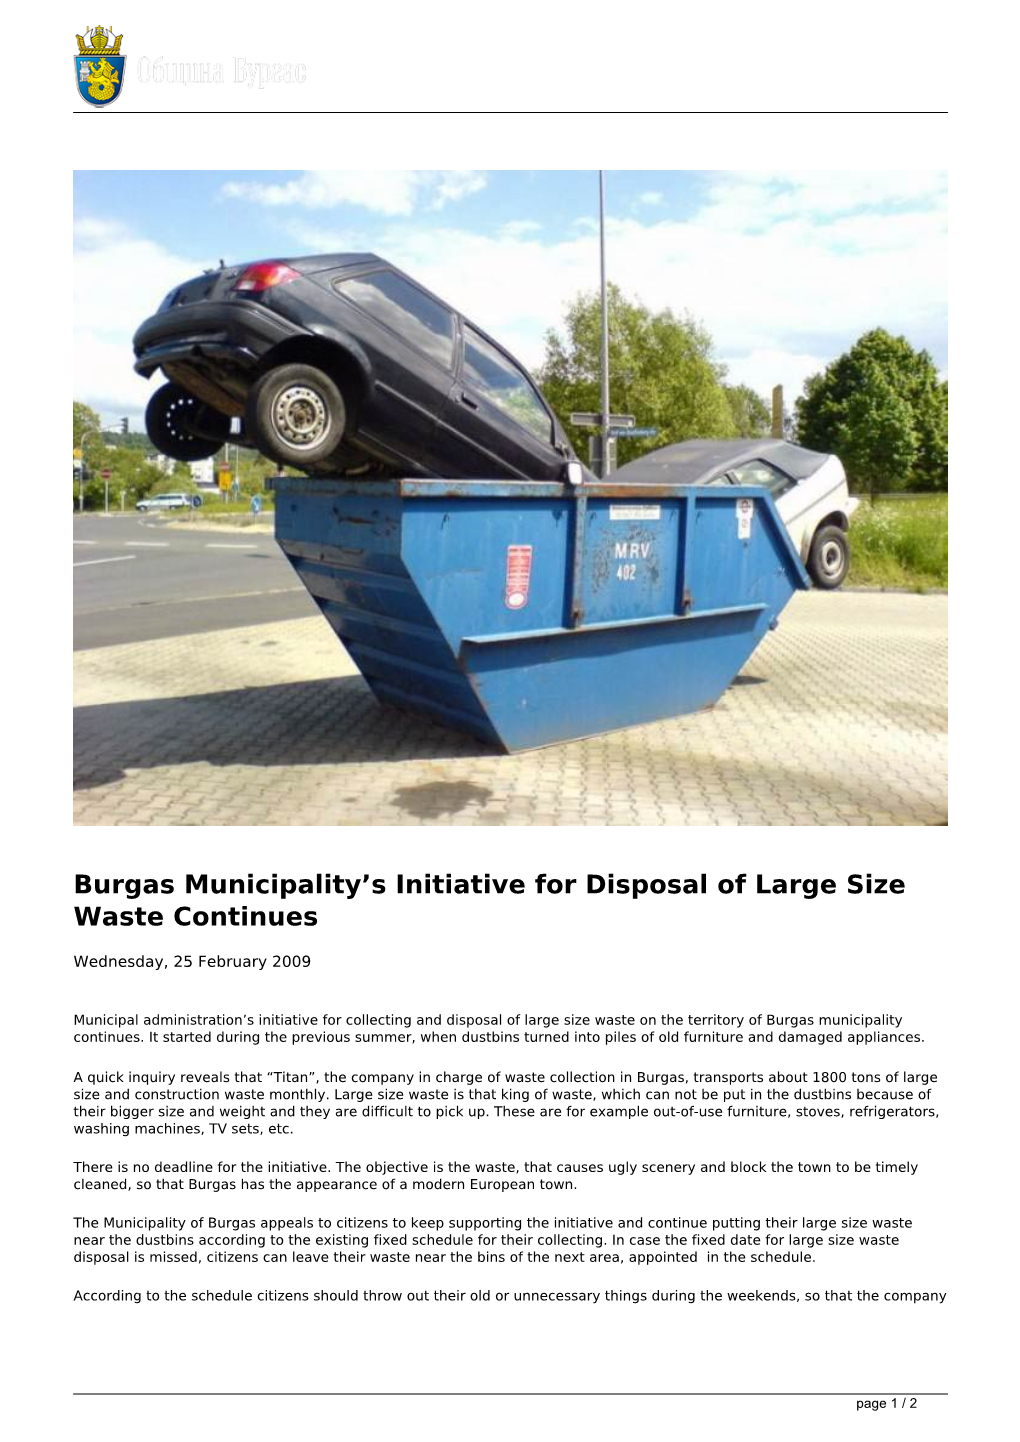 Burgas Municipality's Initiative for Disposal of Large Size Waste Continues